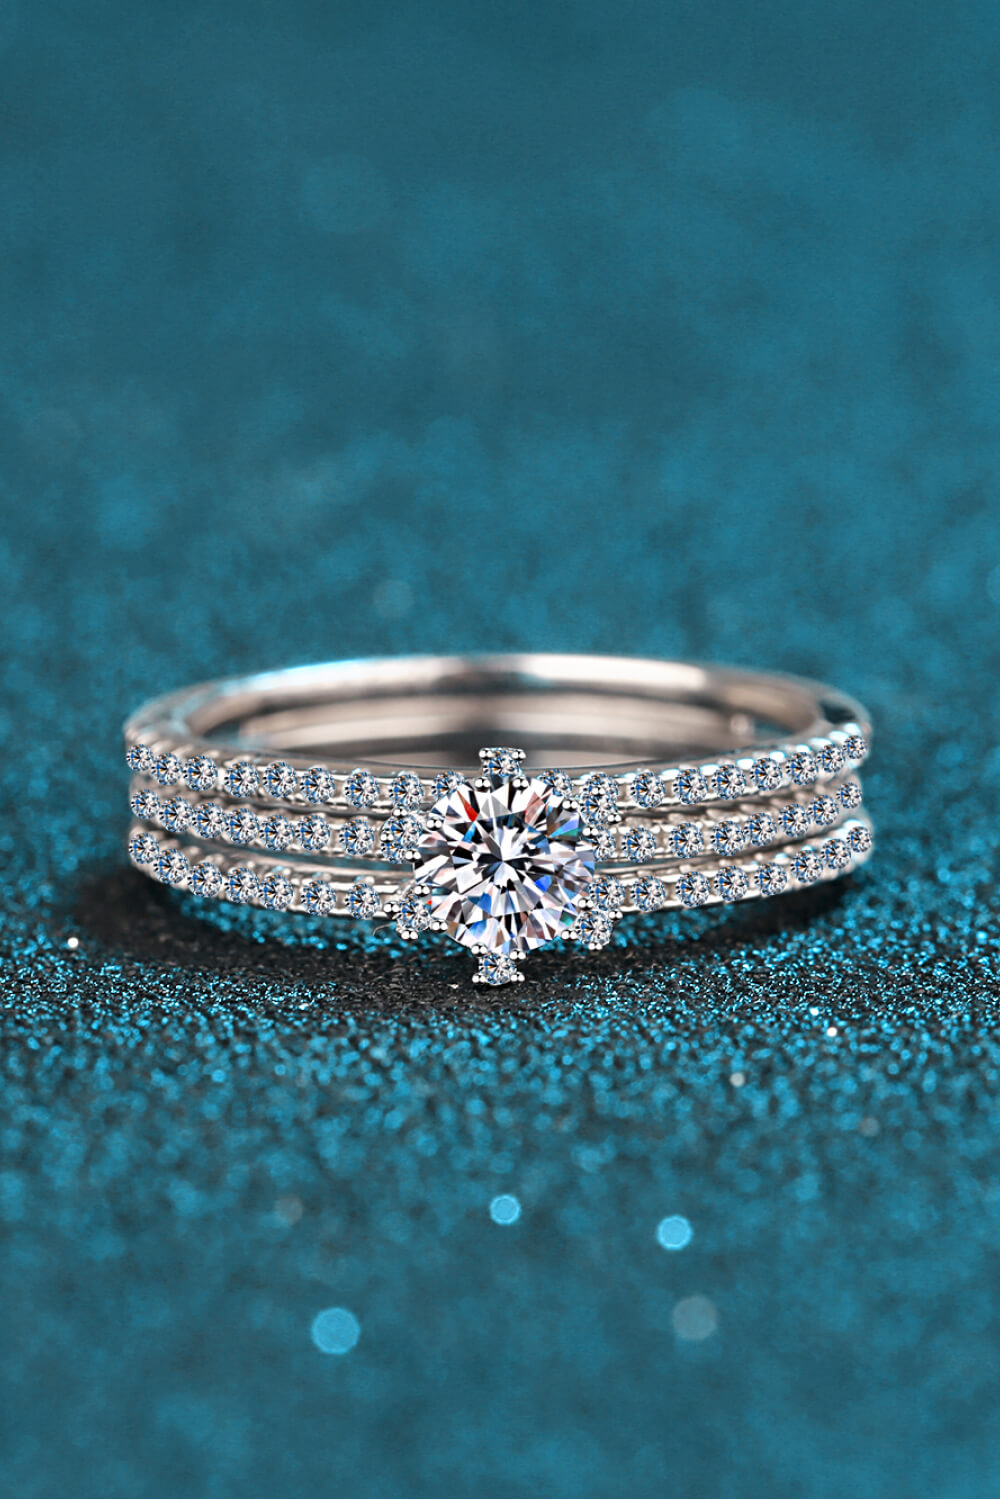 1 Carat Moissanite 925 Sterling Silver Ring - A brilliant and stunning ring featuring a 1-carat Moissanite gemstone set in a 925 sterling silver band.